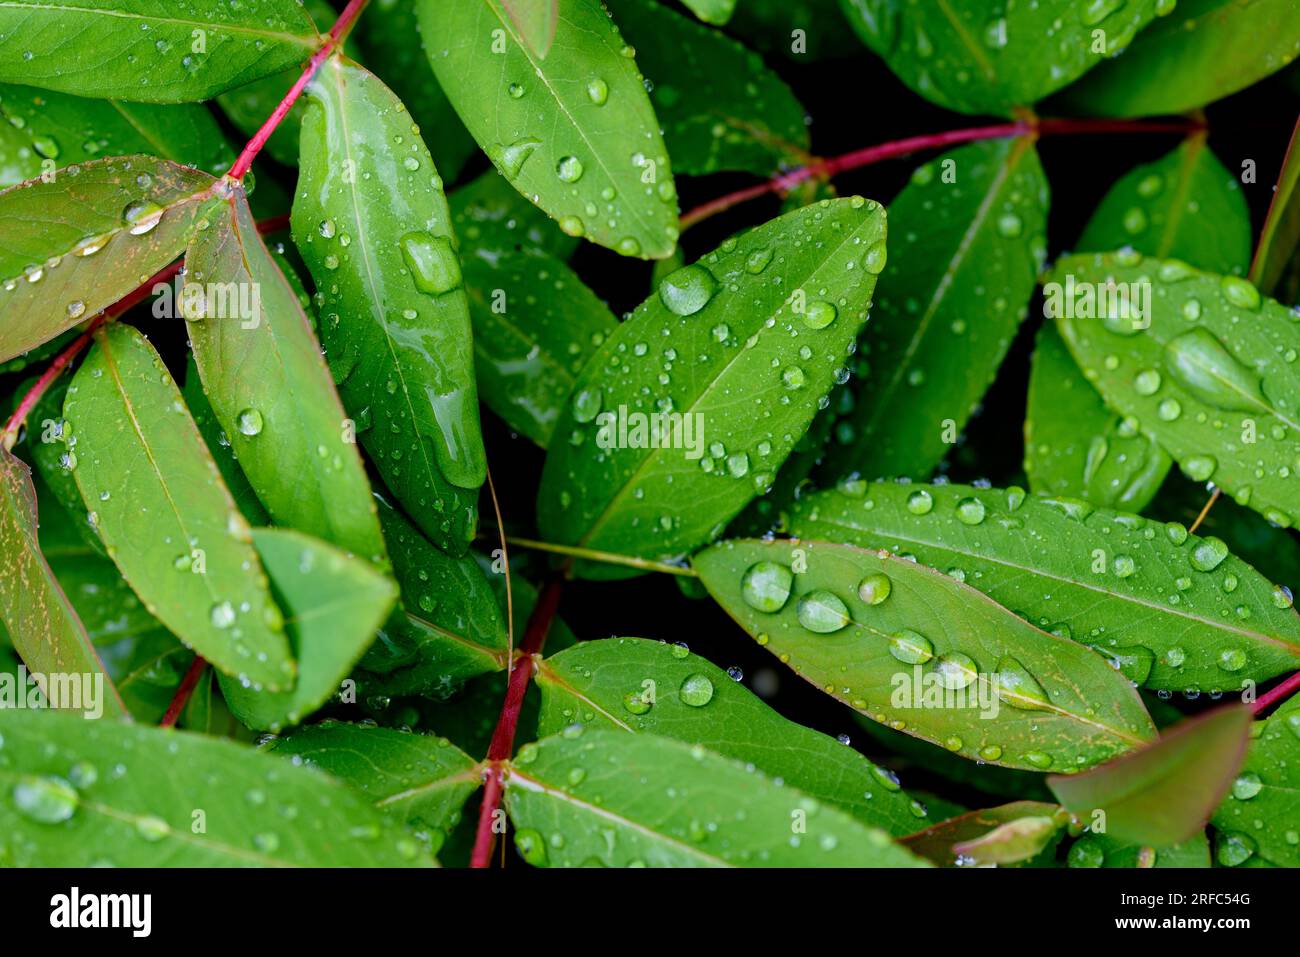 Background, pattern. Raindrops on green leaves of the large-flowered St. John's wort, Hypericum patulum. Leaf showing translucent glands and dark glan Stock Photo